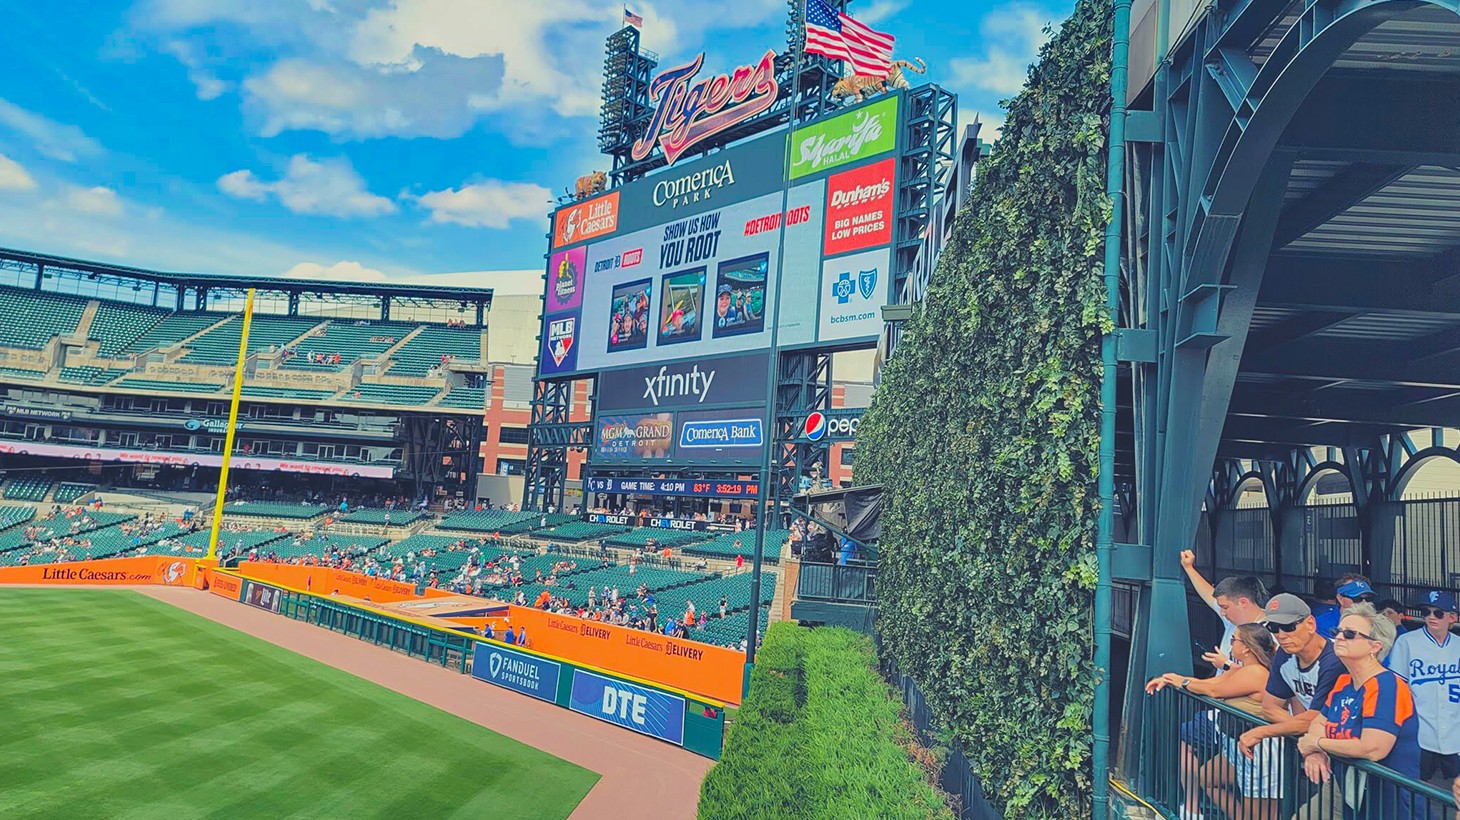 Comerica Park bag policy: Everything you can bring into the stadium